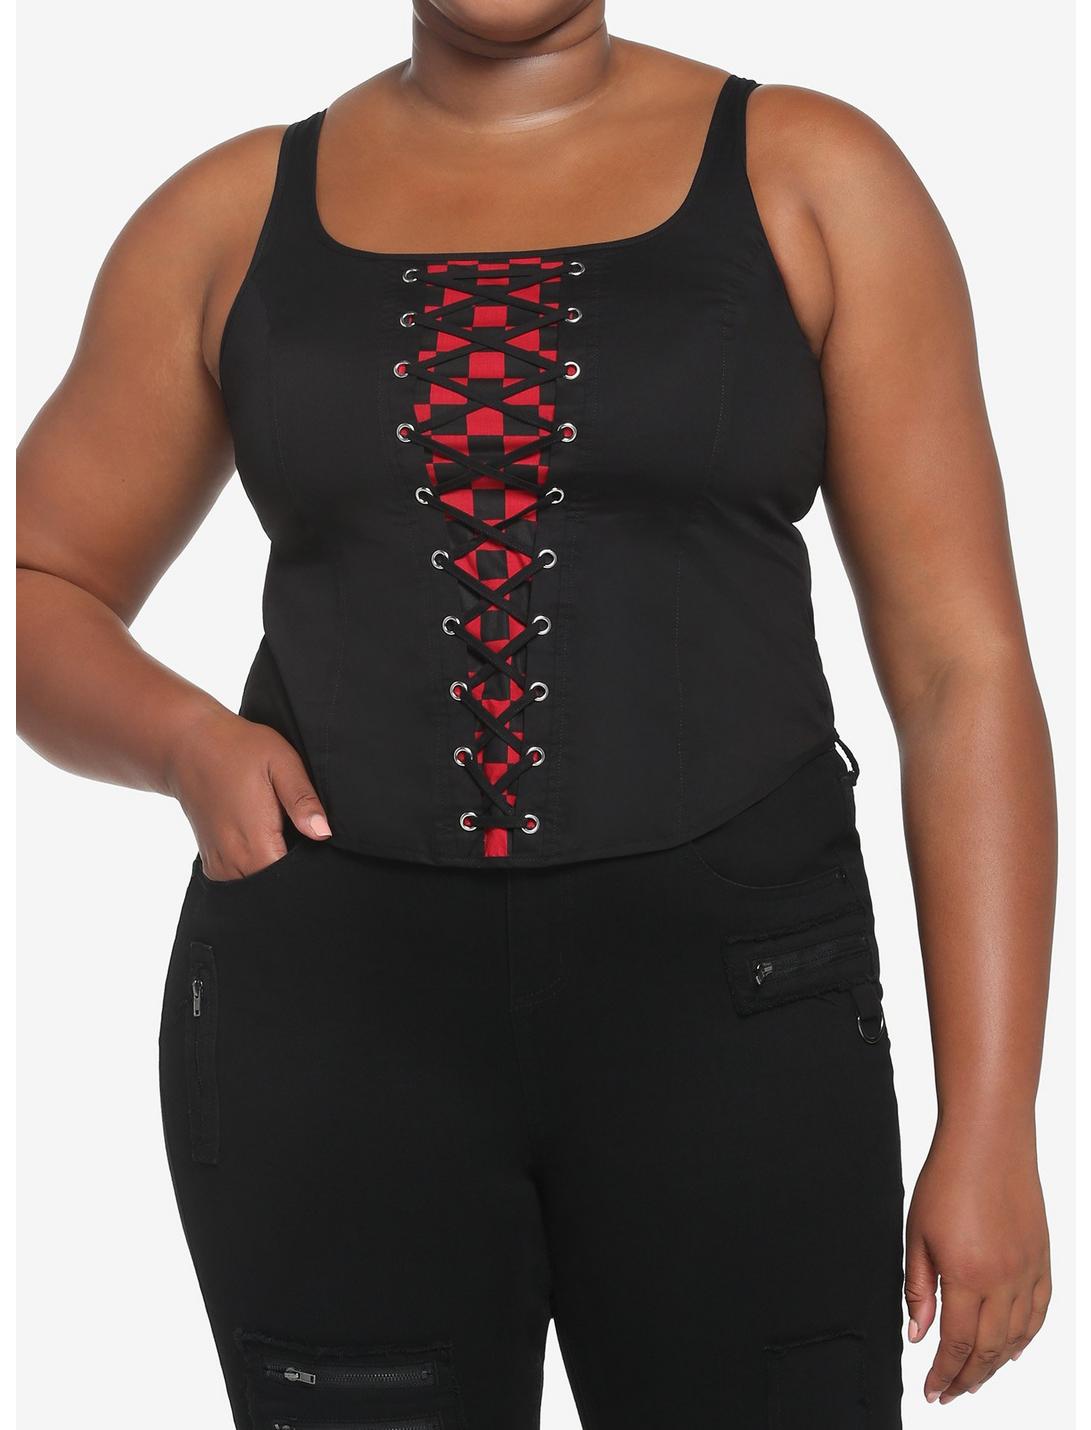 Black & Red Checker Lace-Up Corset Plus Size, CHECKERED, hi-res